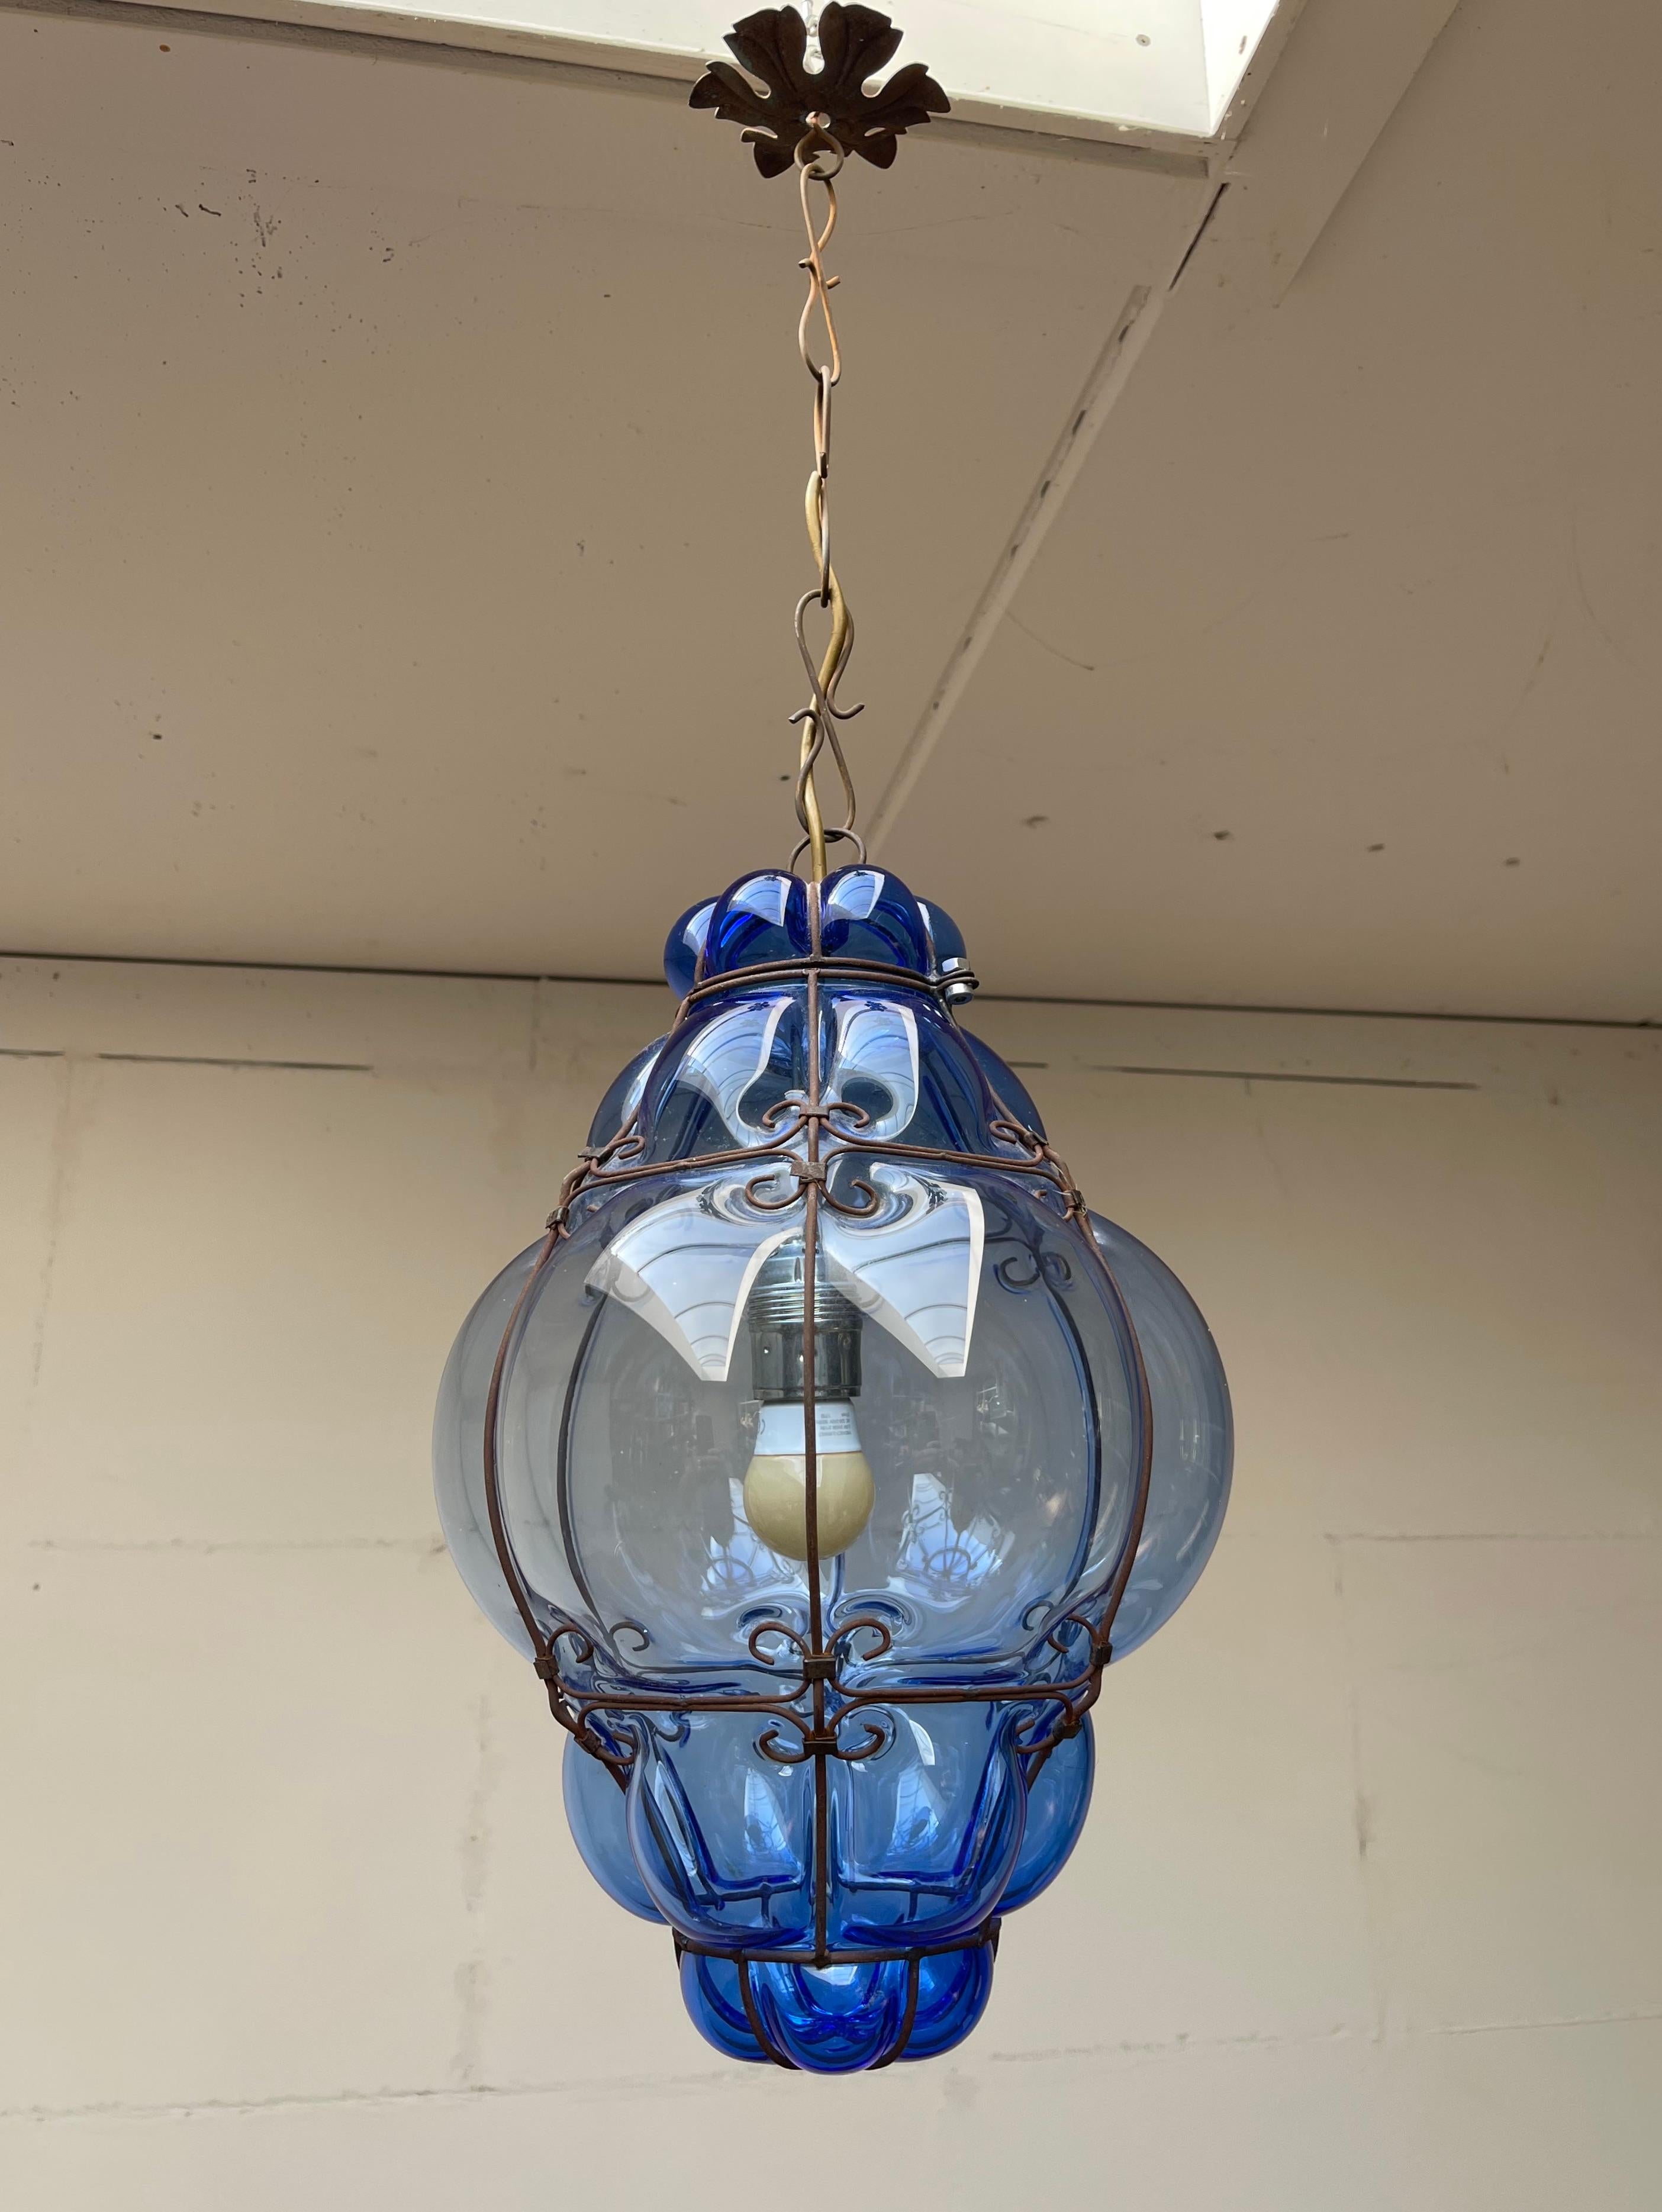 Beautiful Sapphire color and practical size Italian fixture with mouth blown glass in a metal frame. 

If you are looking for a rare and stylish Murano light fixture to grace your home then this handmade semi-antique specimen could be flying your